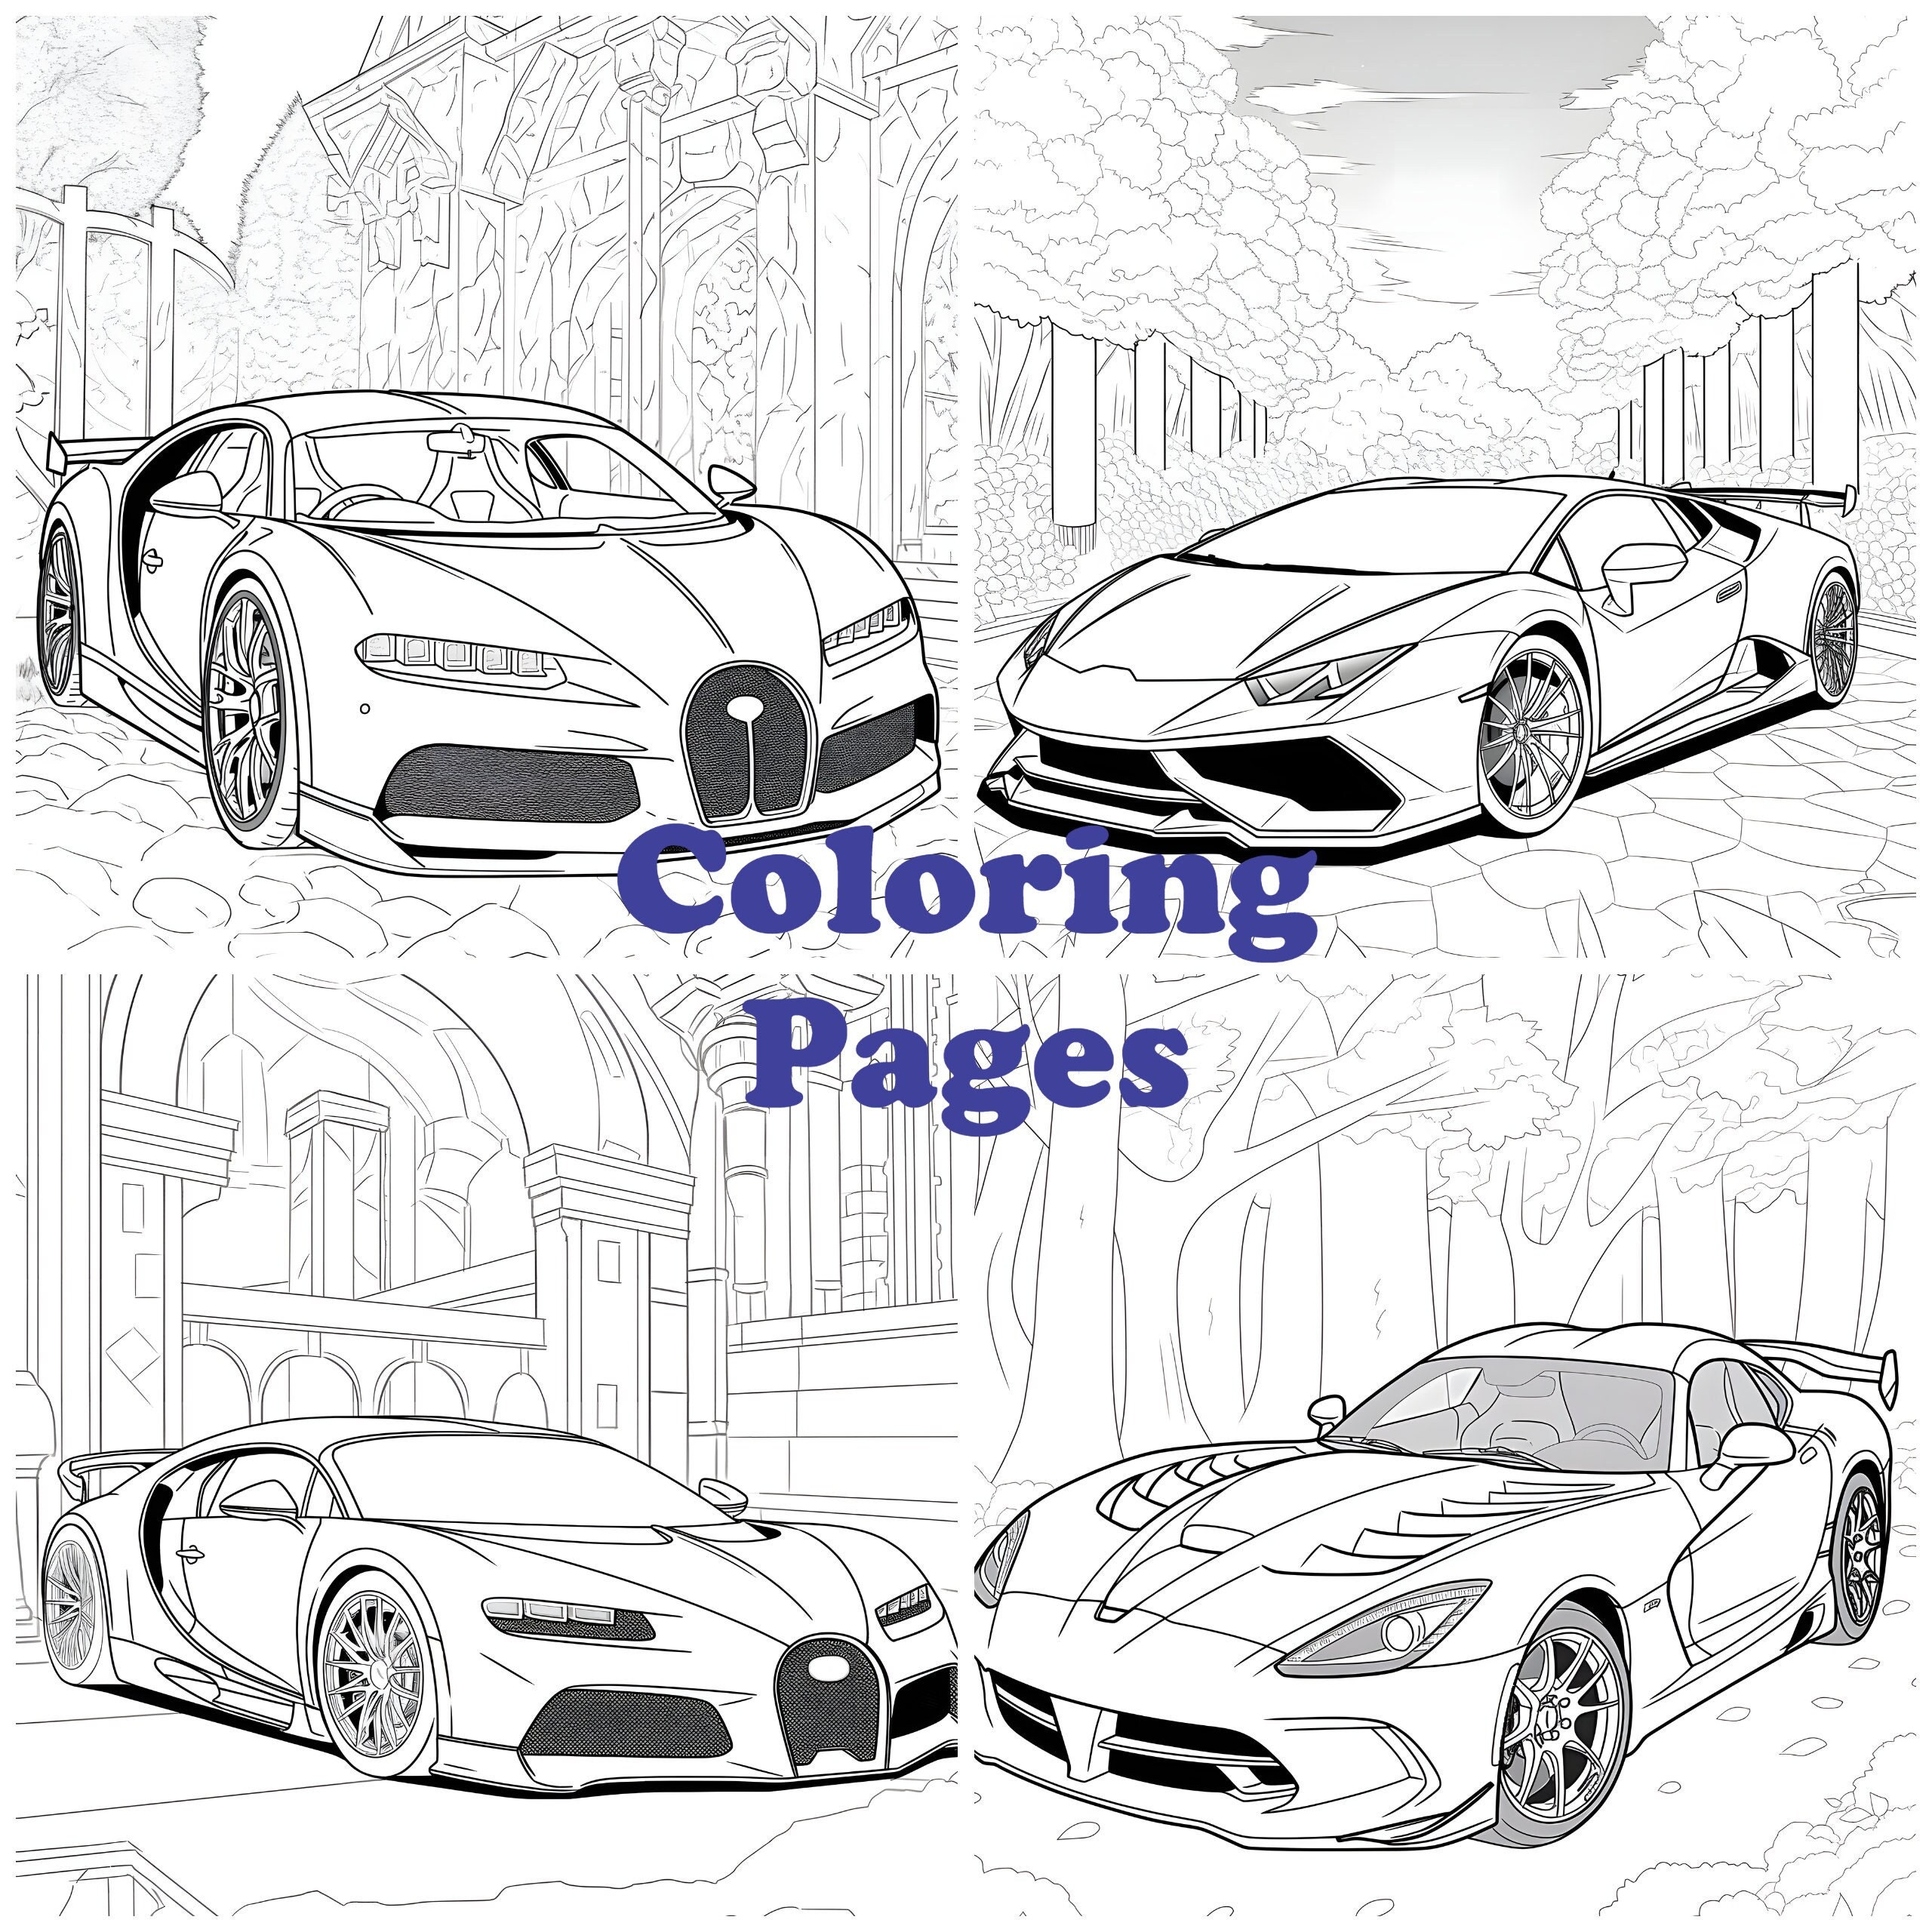 Coloring Books For Boys Cool Cars And Vehicles: The Ultimate Luxury Car  Coloring Book , SuperCars , Monster Trucks , Bikes , Planes , Boats And  more